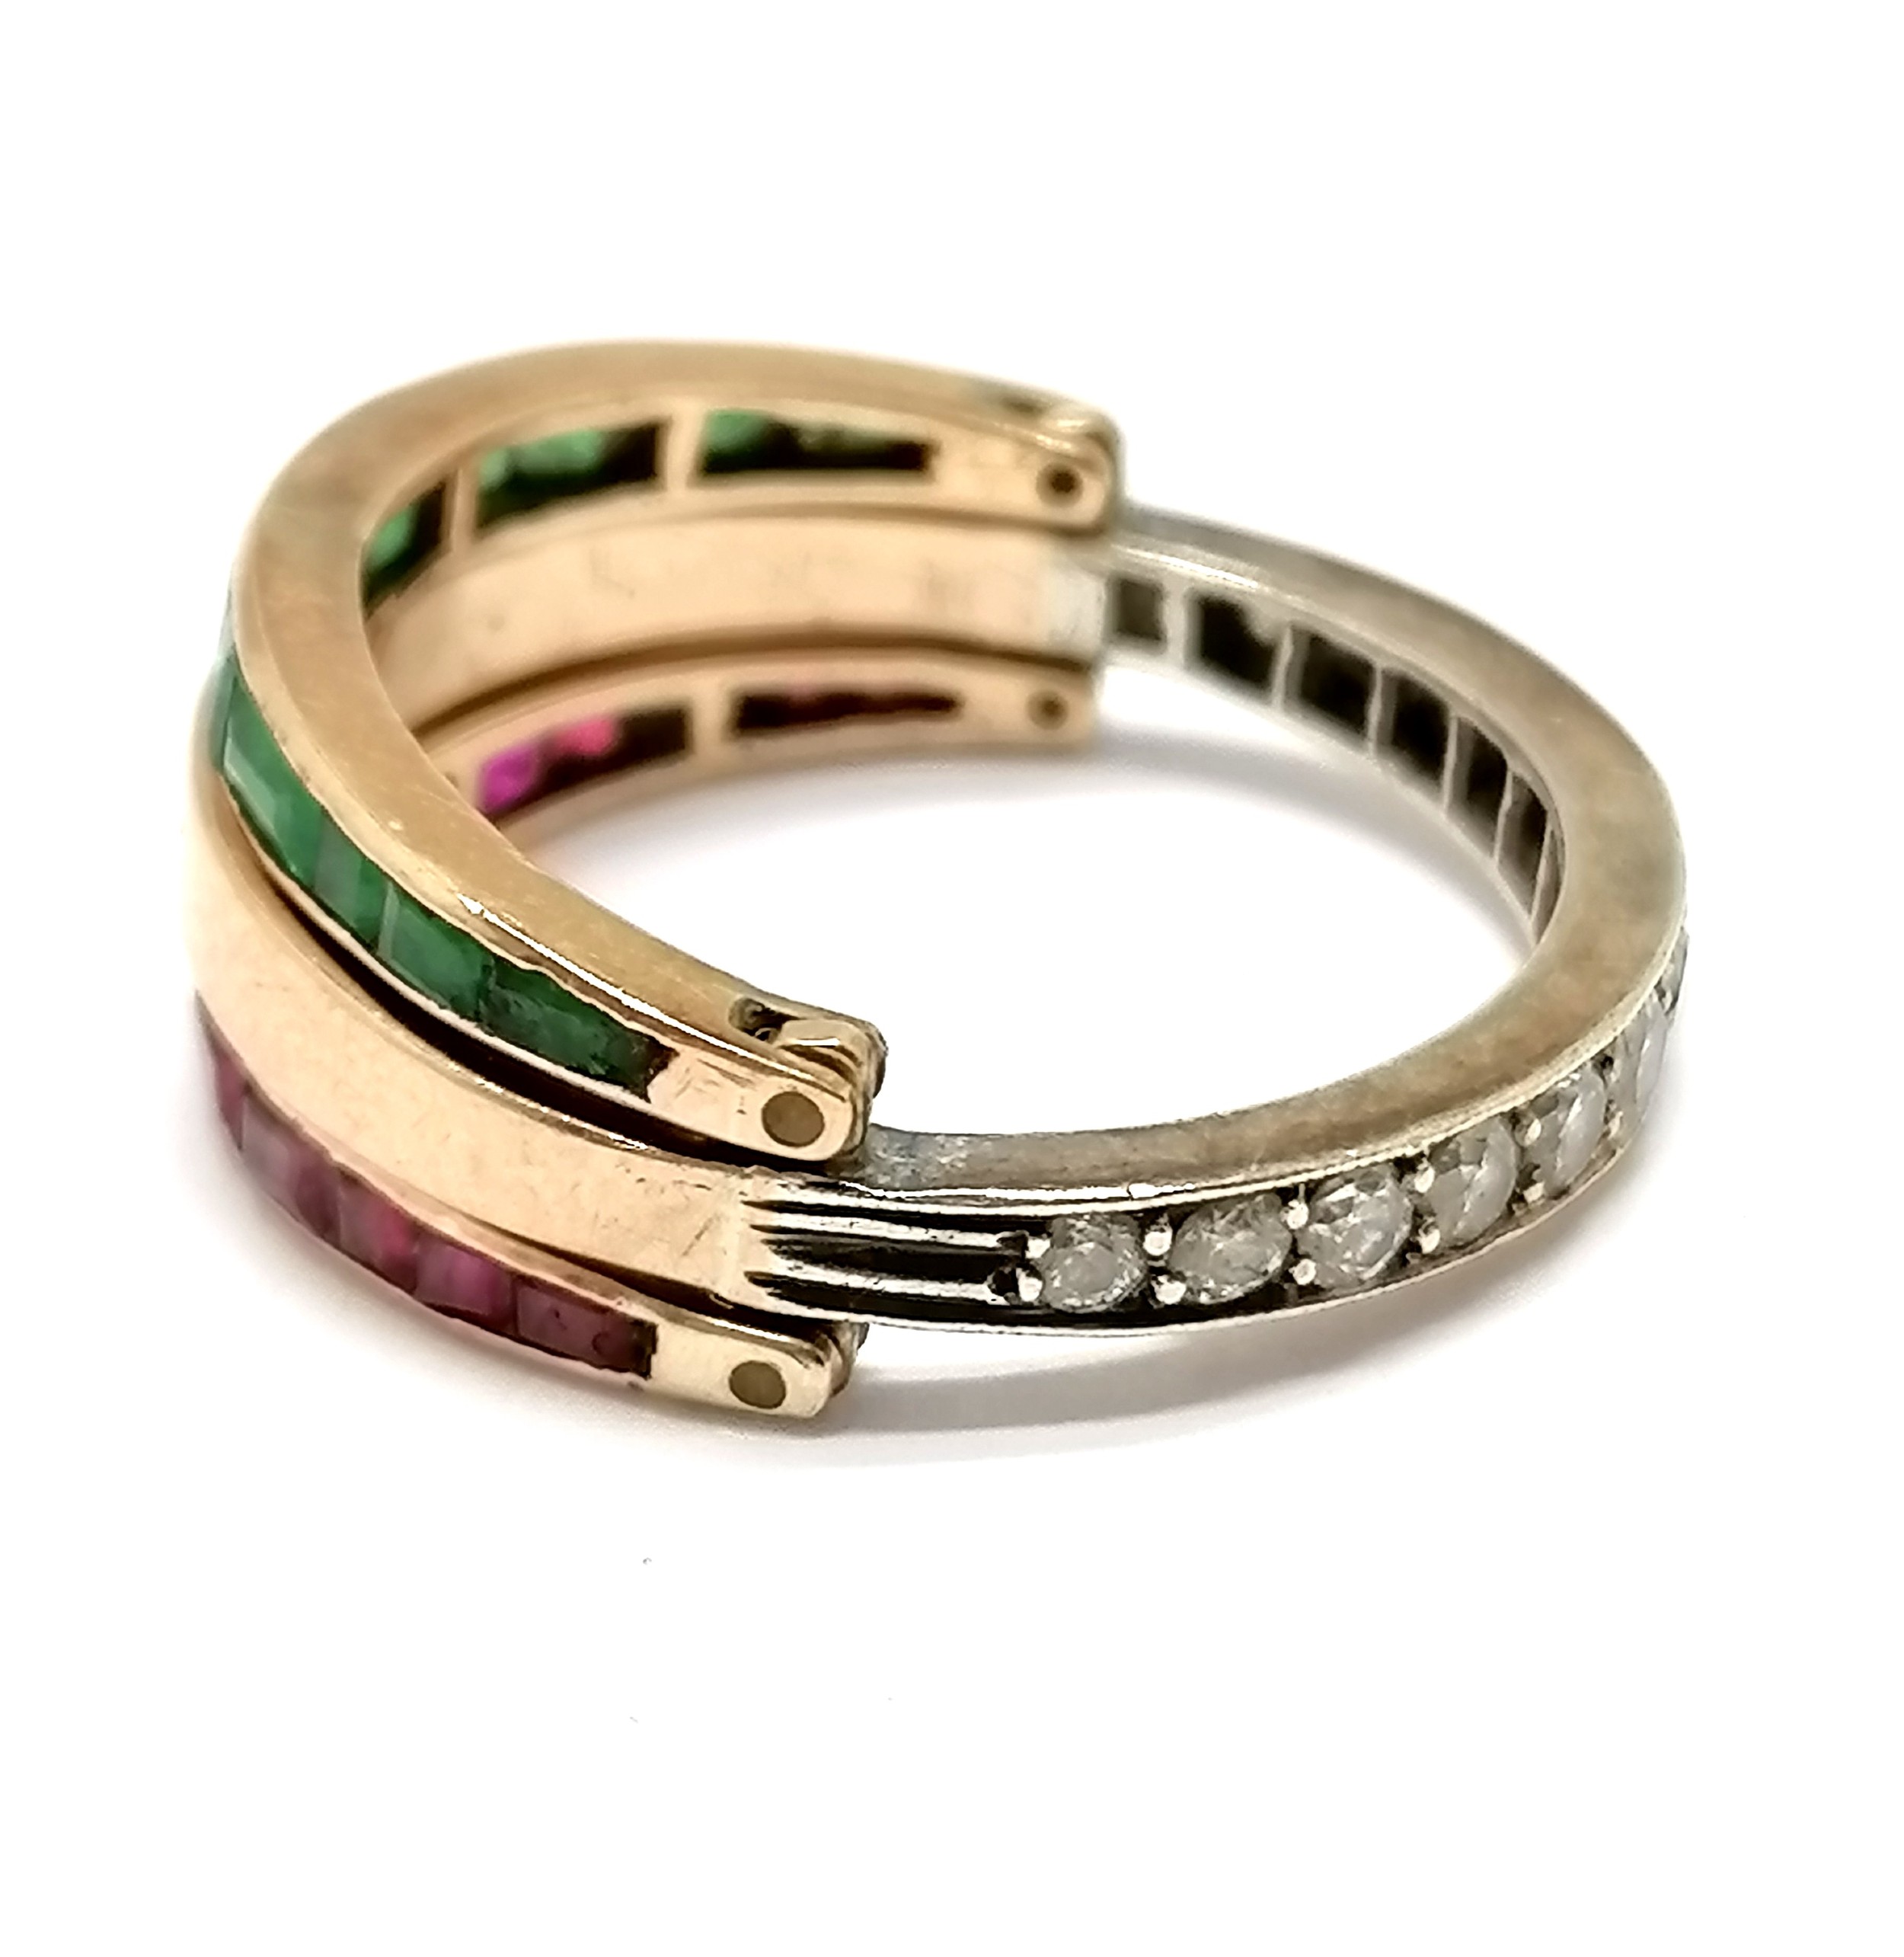 Unmarked gold reversible / flip over ring channel set with diamond / ruby / emerald - size R½ & 5.3g